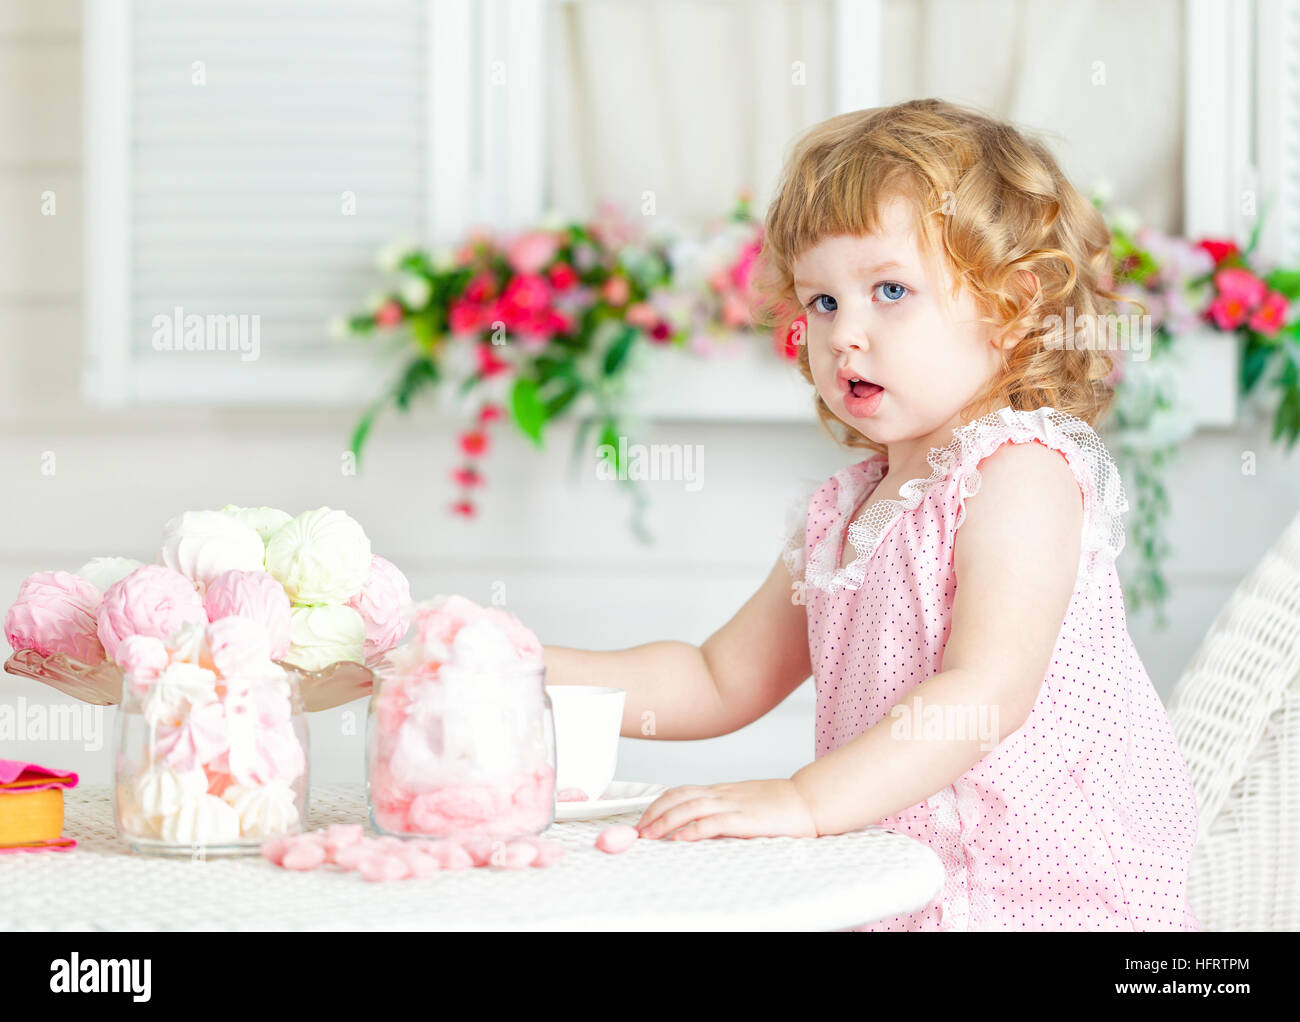 Little cute curly girl in a pink dress with lace and polka dots sitting at the table in the garden and eating different sweets. Stock Photo